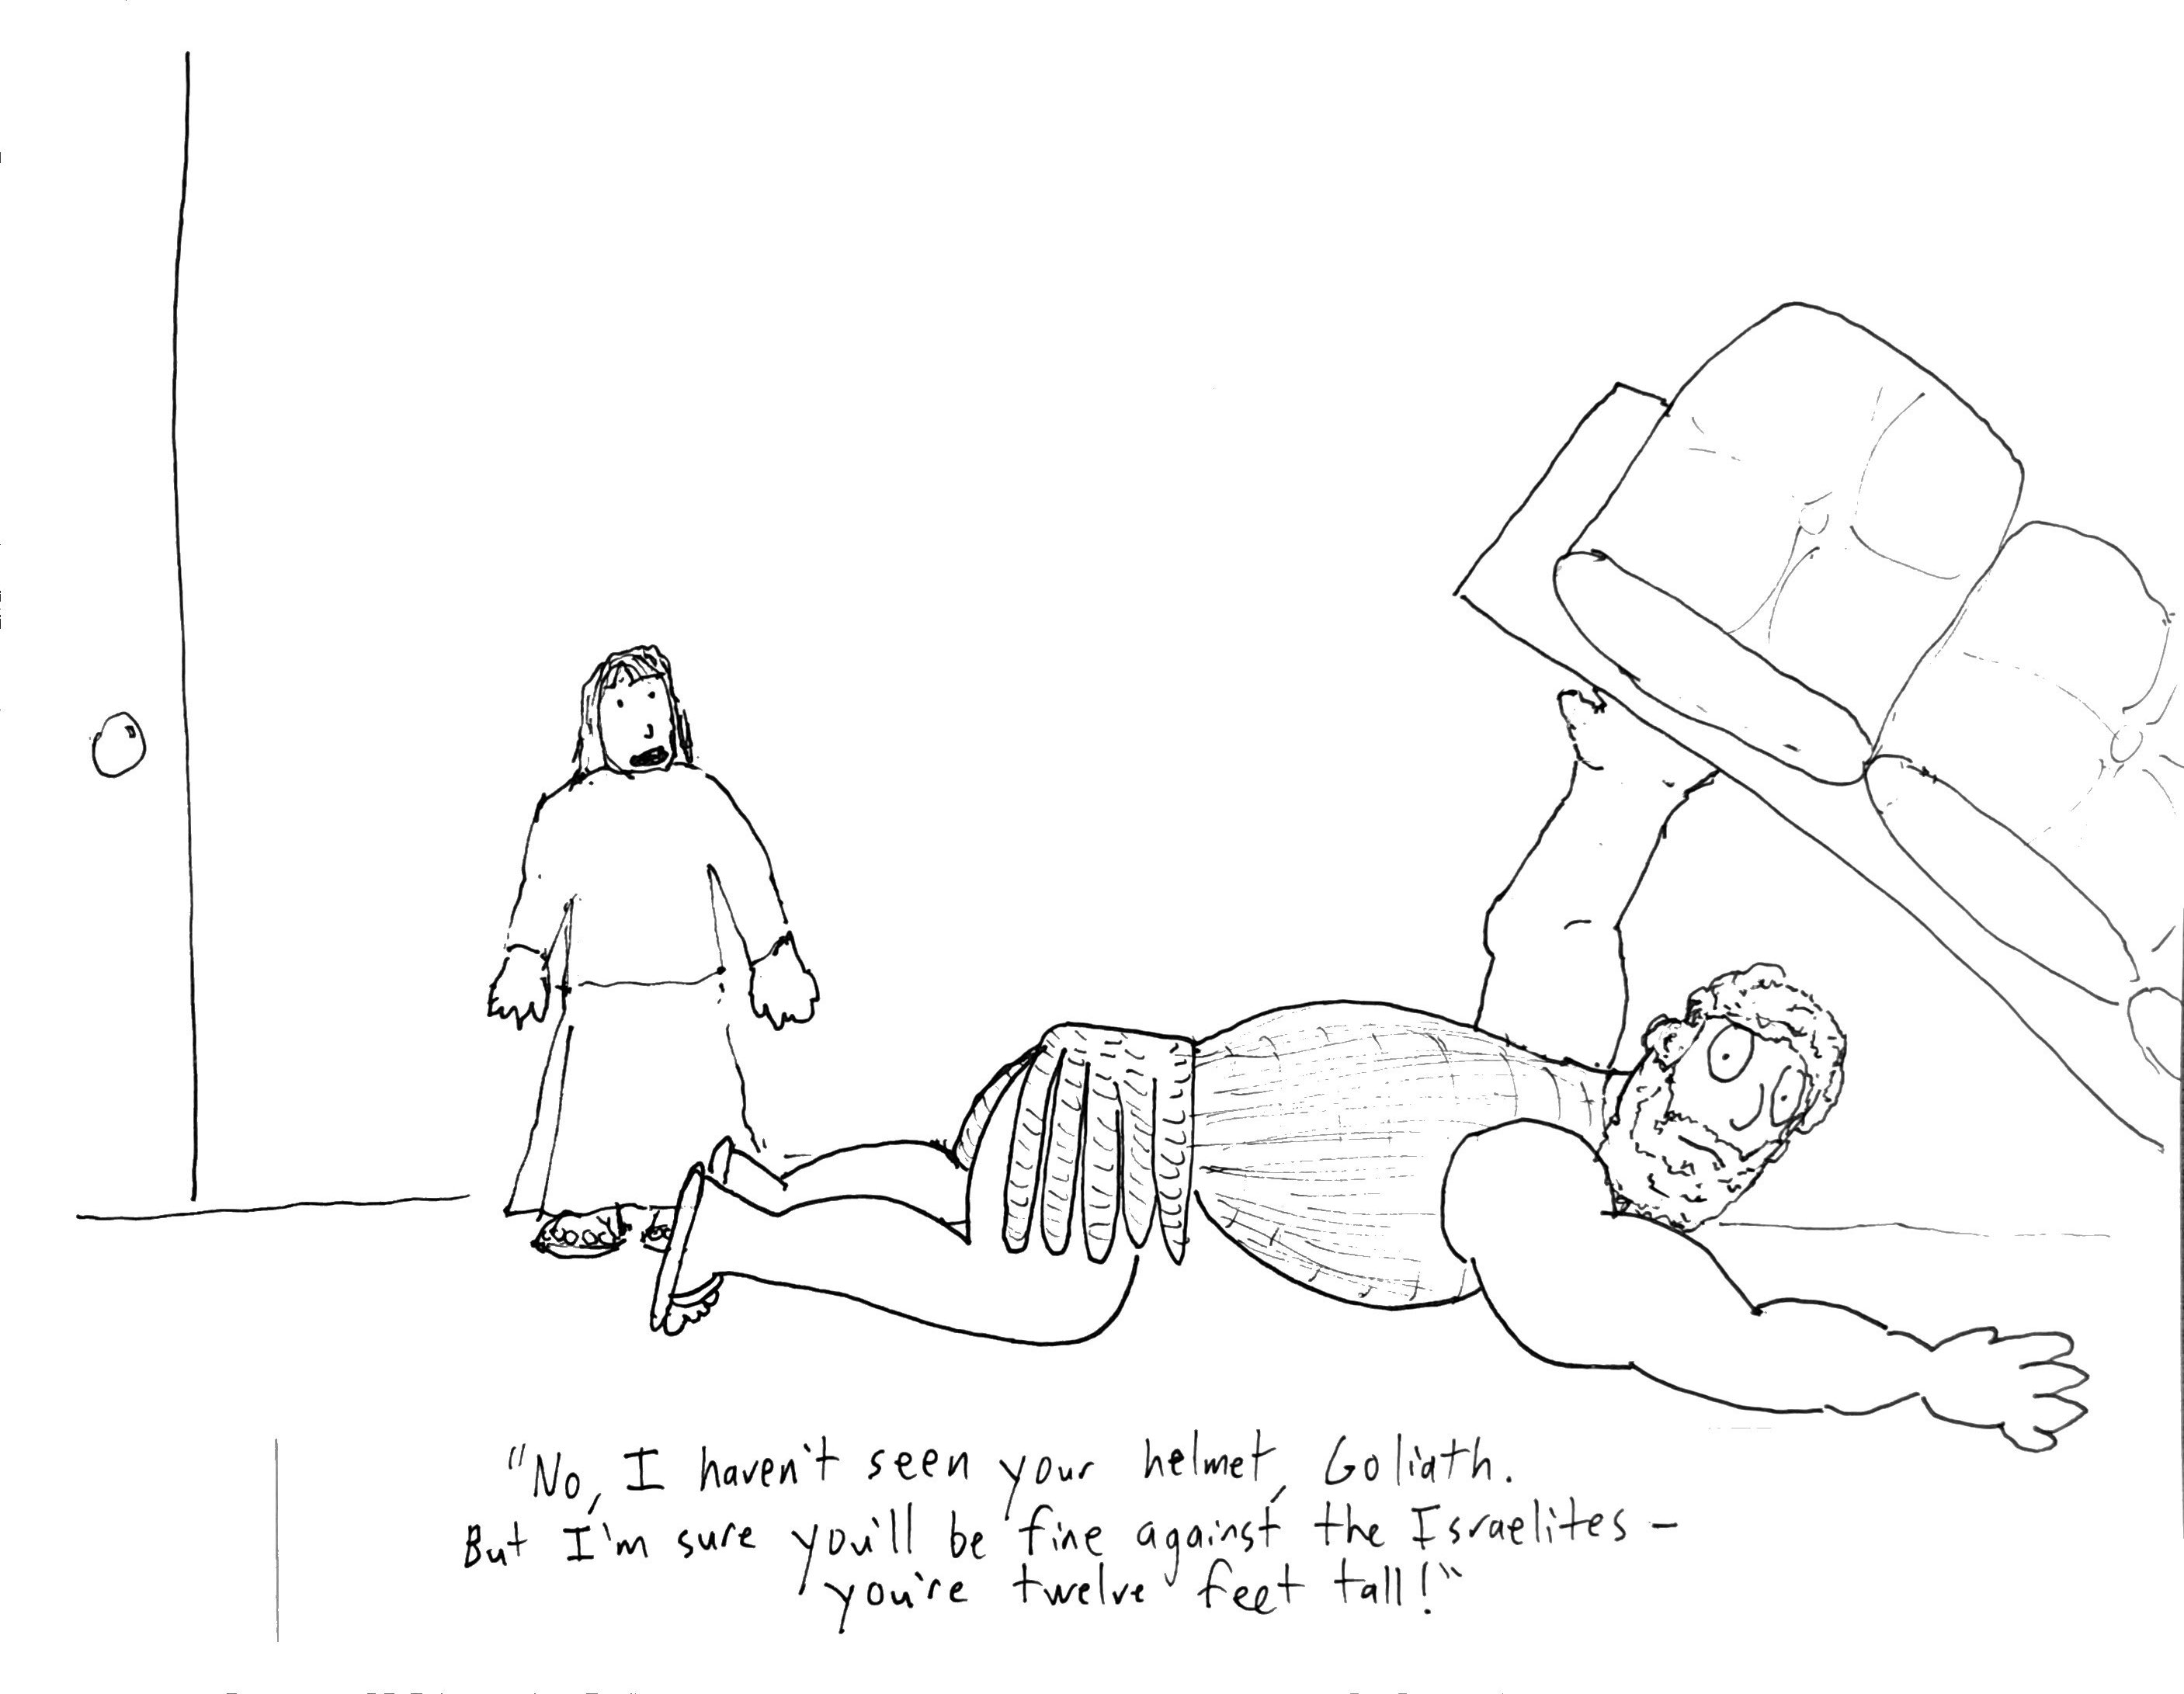 An enormous man is sprawled on the ground, lifting a couch over his head, looking for something. A normal sized woman is in the background with her mouth open. Caption: “No, I haven’t seen your helmet, Goliath. But I’m sure you’ll be fine against the Israelites - you’re twelve feet tall!